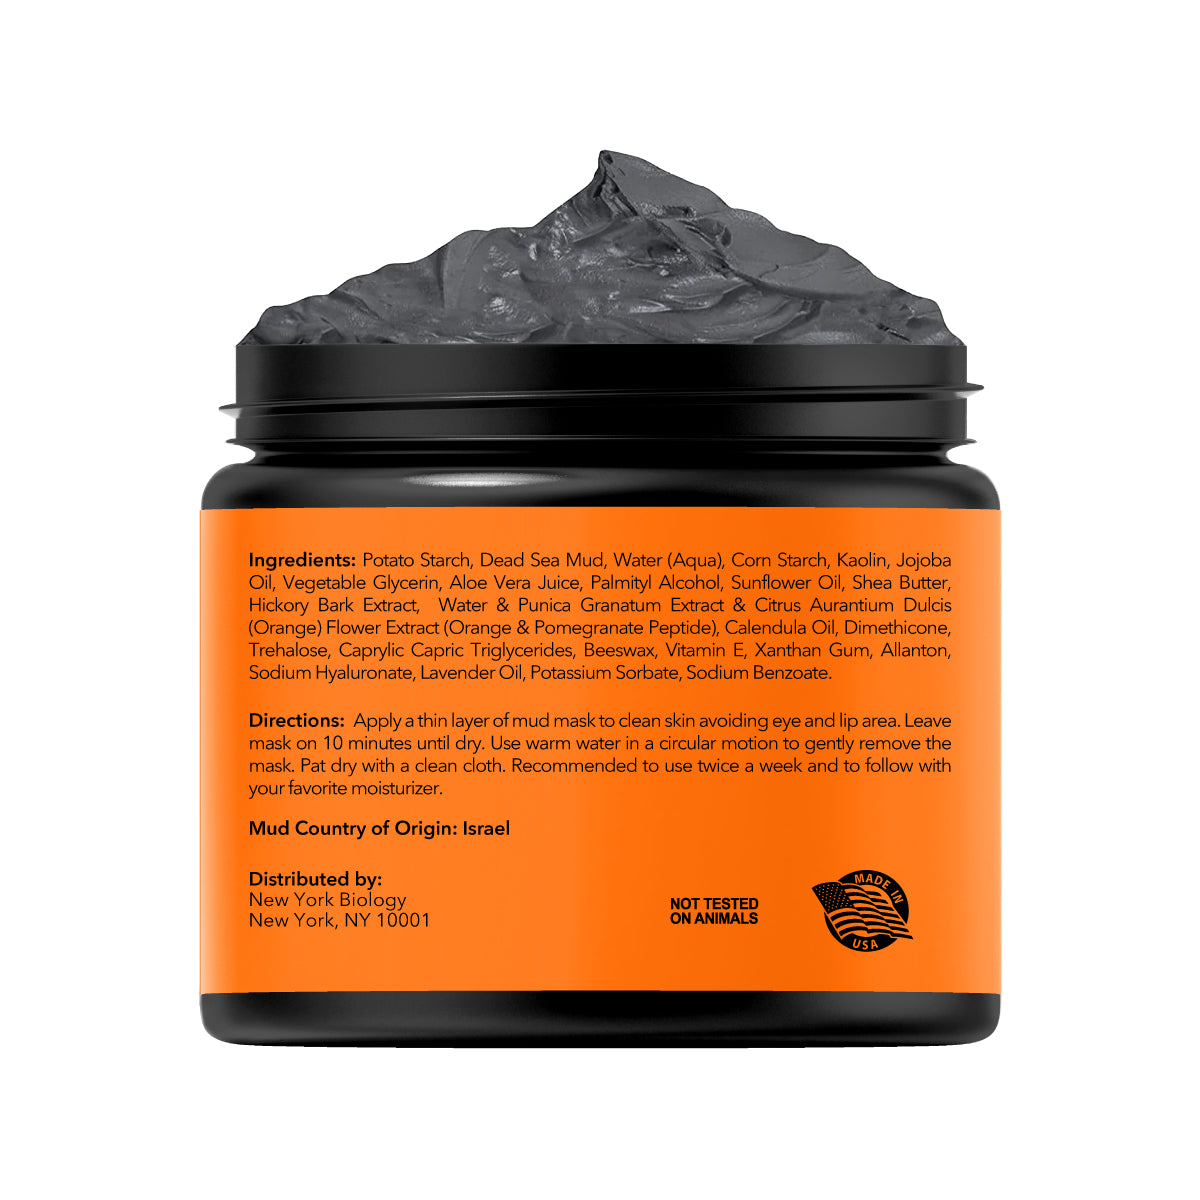 Dead Sea Mud Mask infused with Peptides - 4 oz